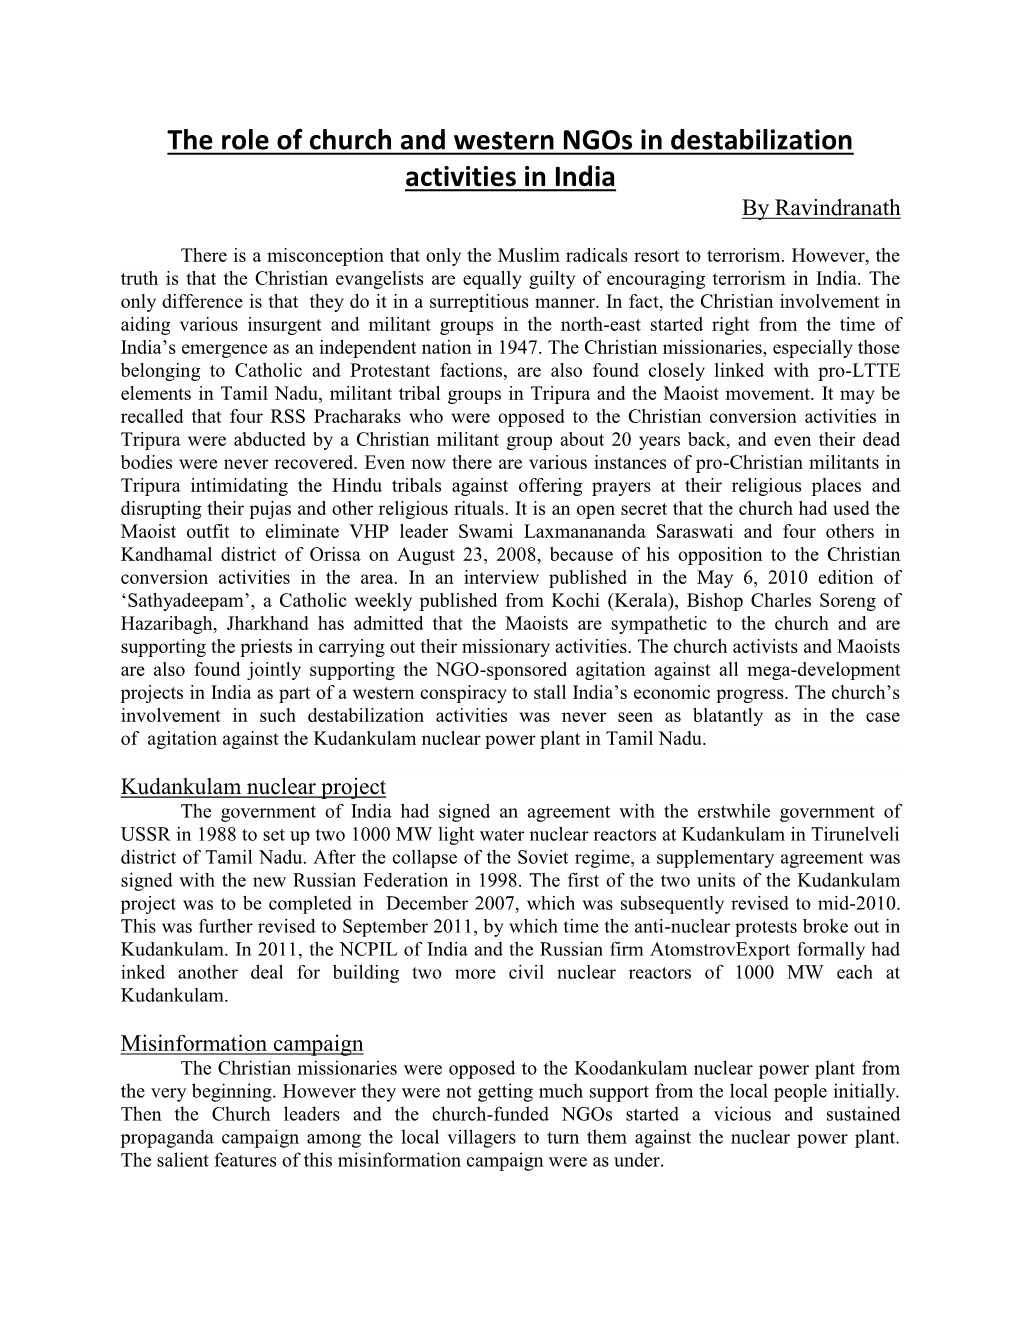 The Role of Church and Western Ngos in Destabilization Activities in India by Ravindranath